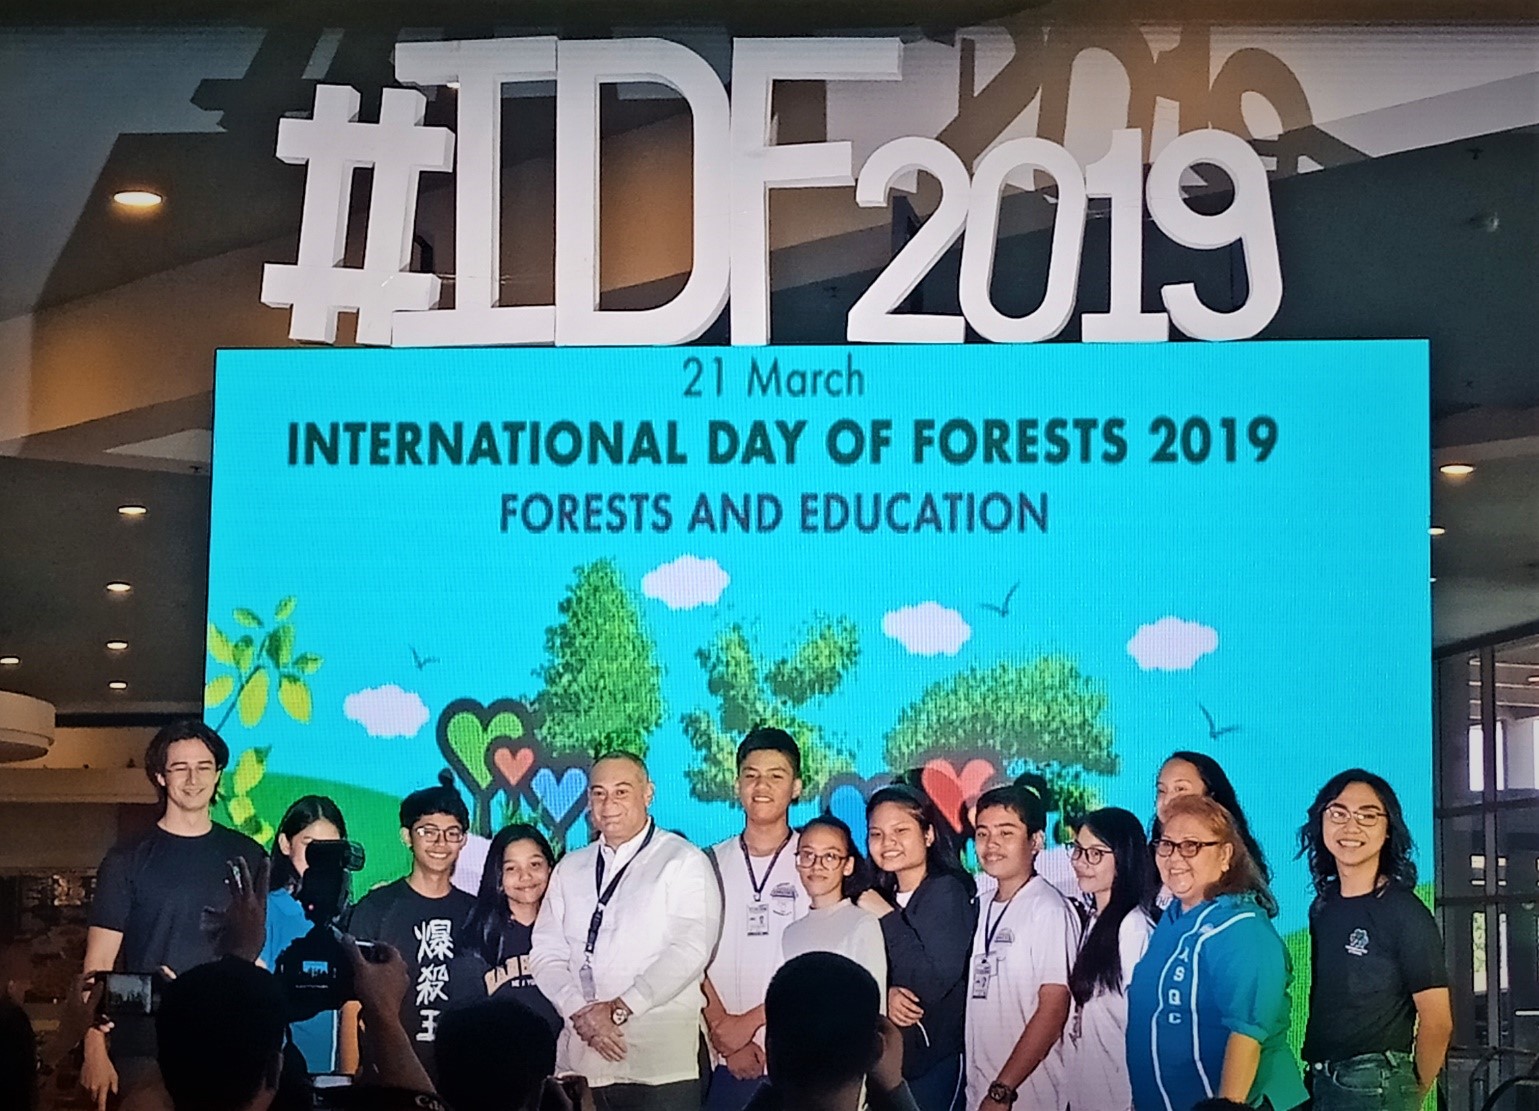 INTERNATIONAL DAY OF FORESTS 2019